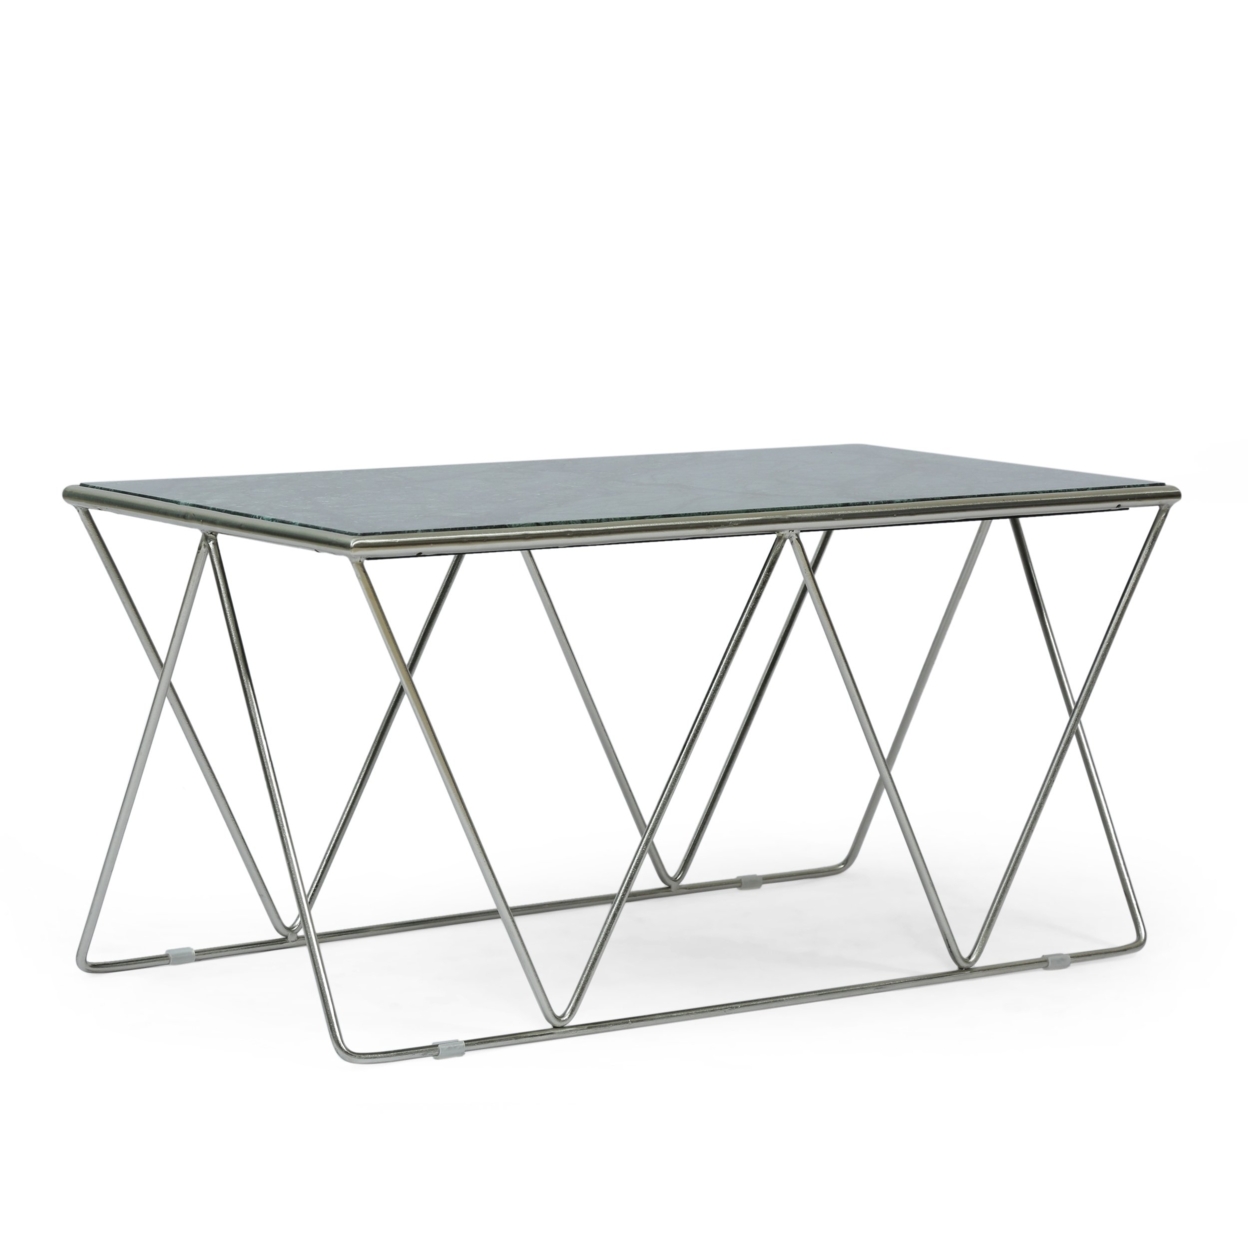 Massie Modern Glam Handcrafted Marble Top Coffee Table - Green